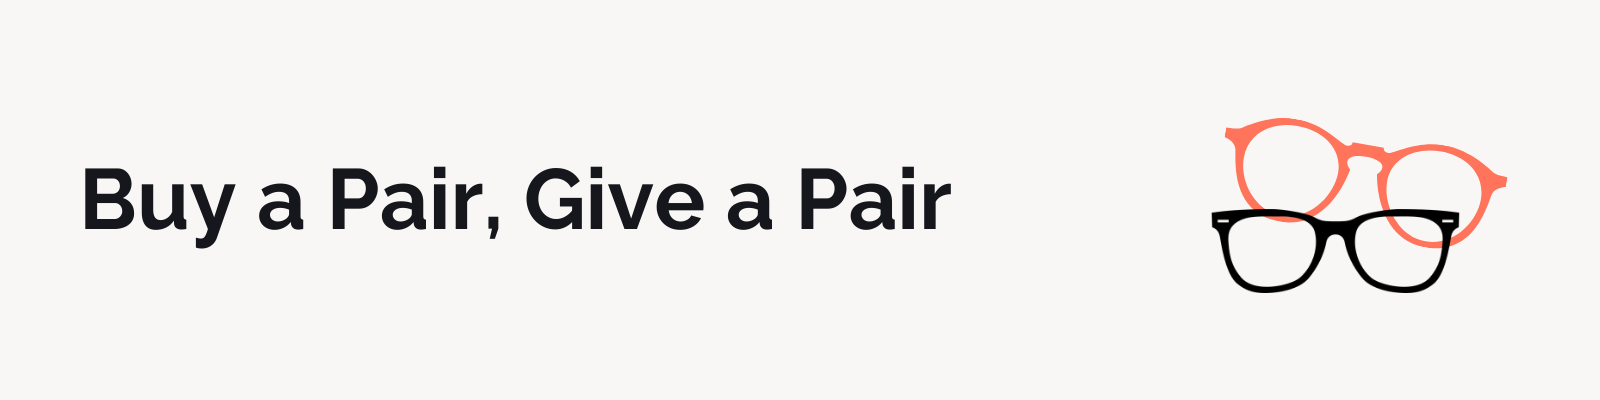 Cause marketing example - Buy Pair, Give Pair